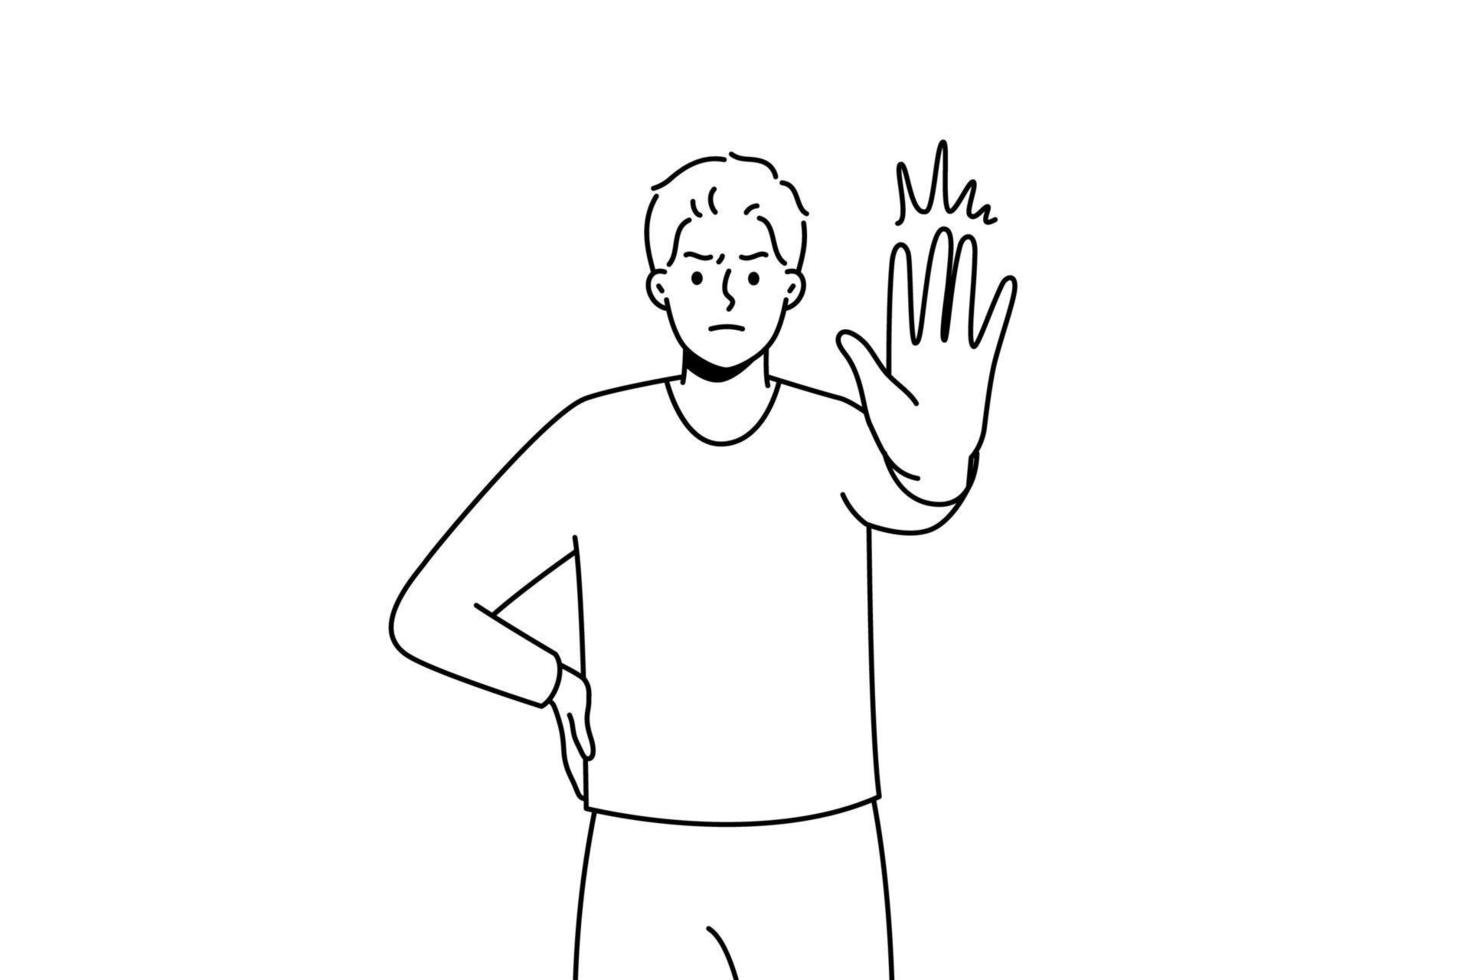 Decisive young man show no hand gesture. Serious male demonstrate stop sign. Nonverbal communication and body language. Vector illustration.